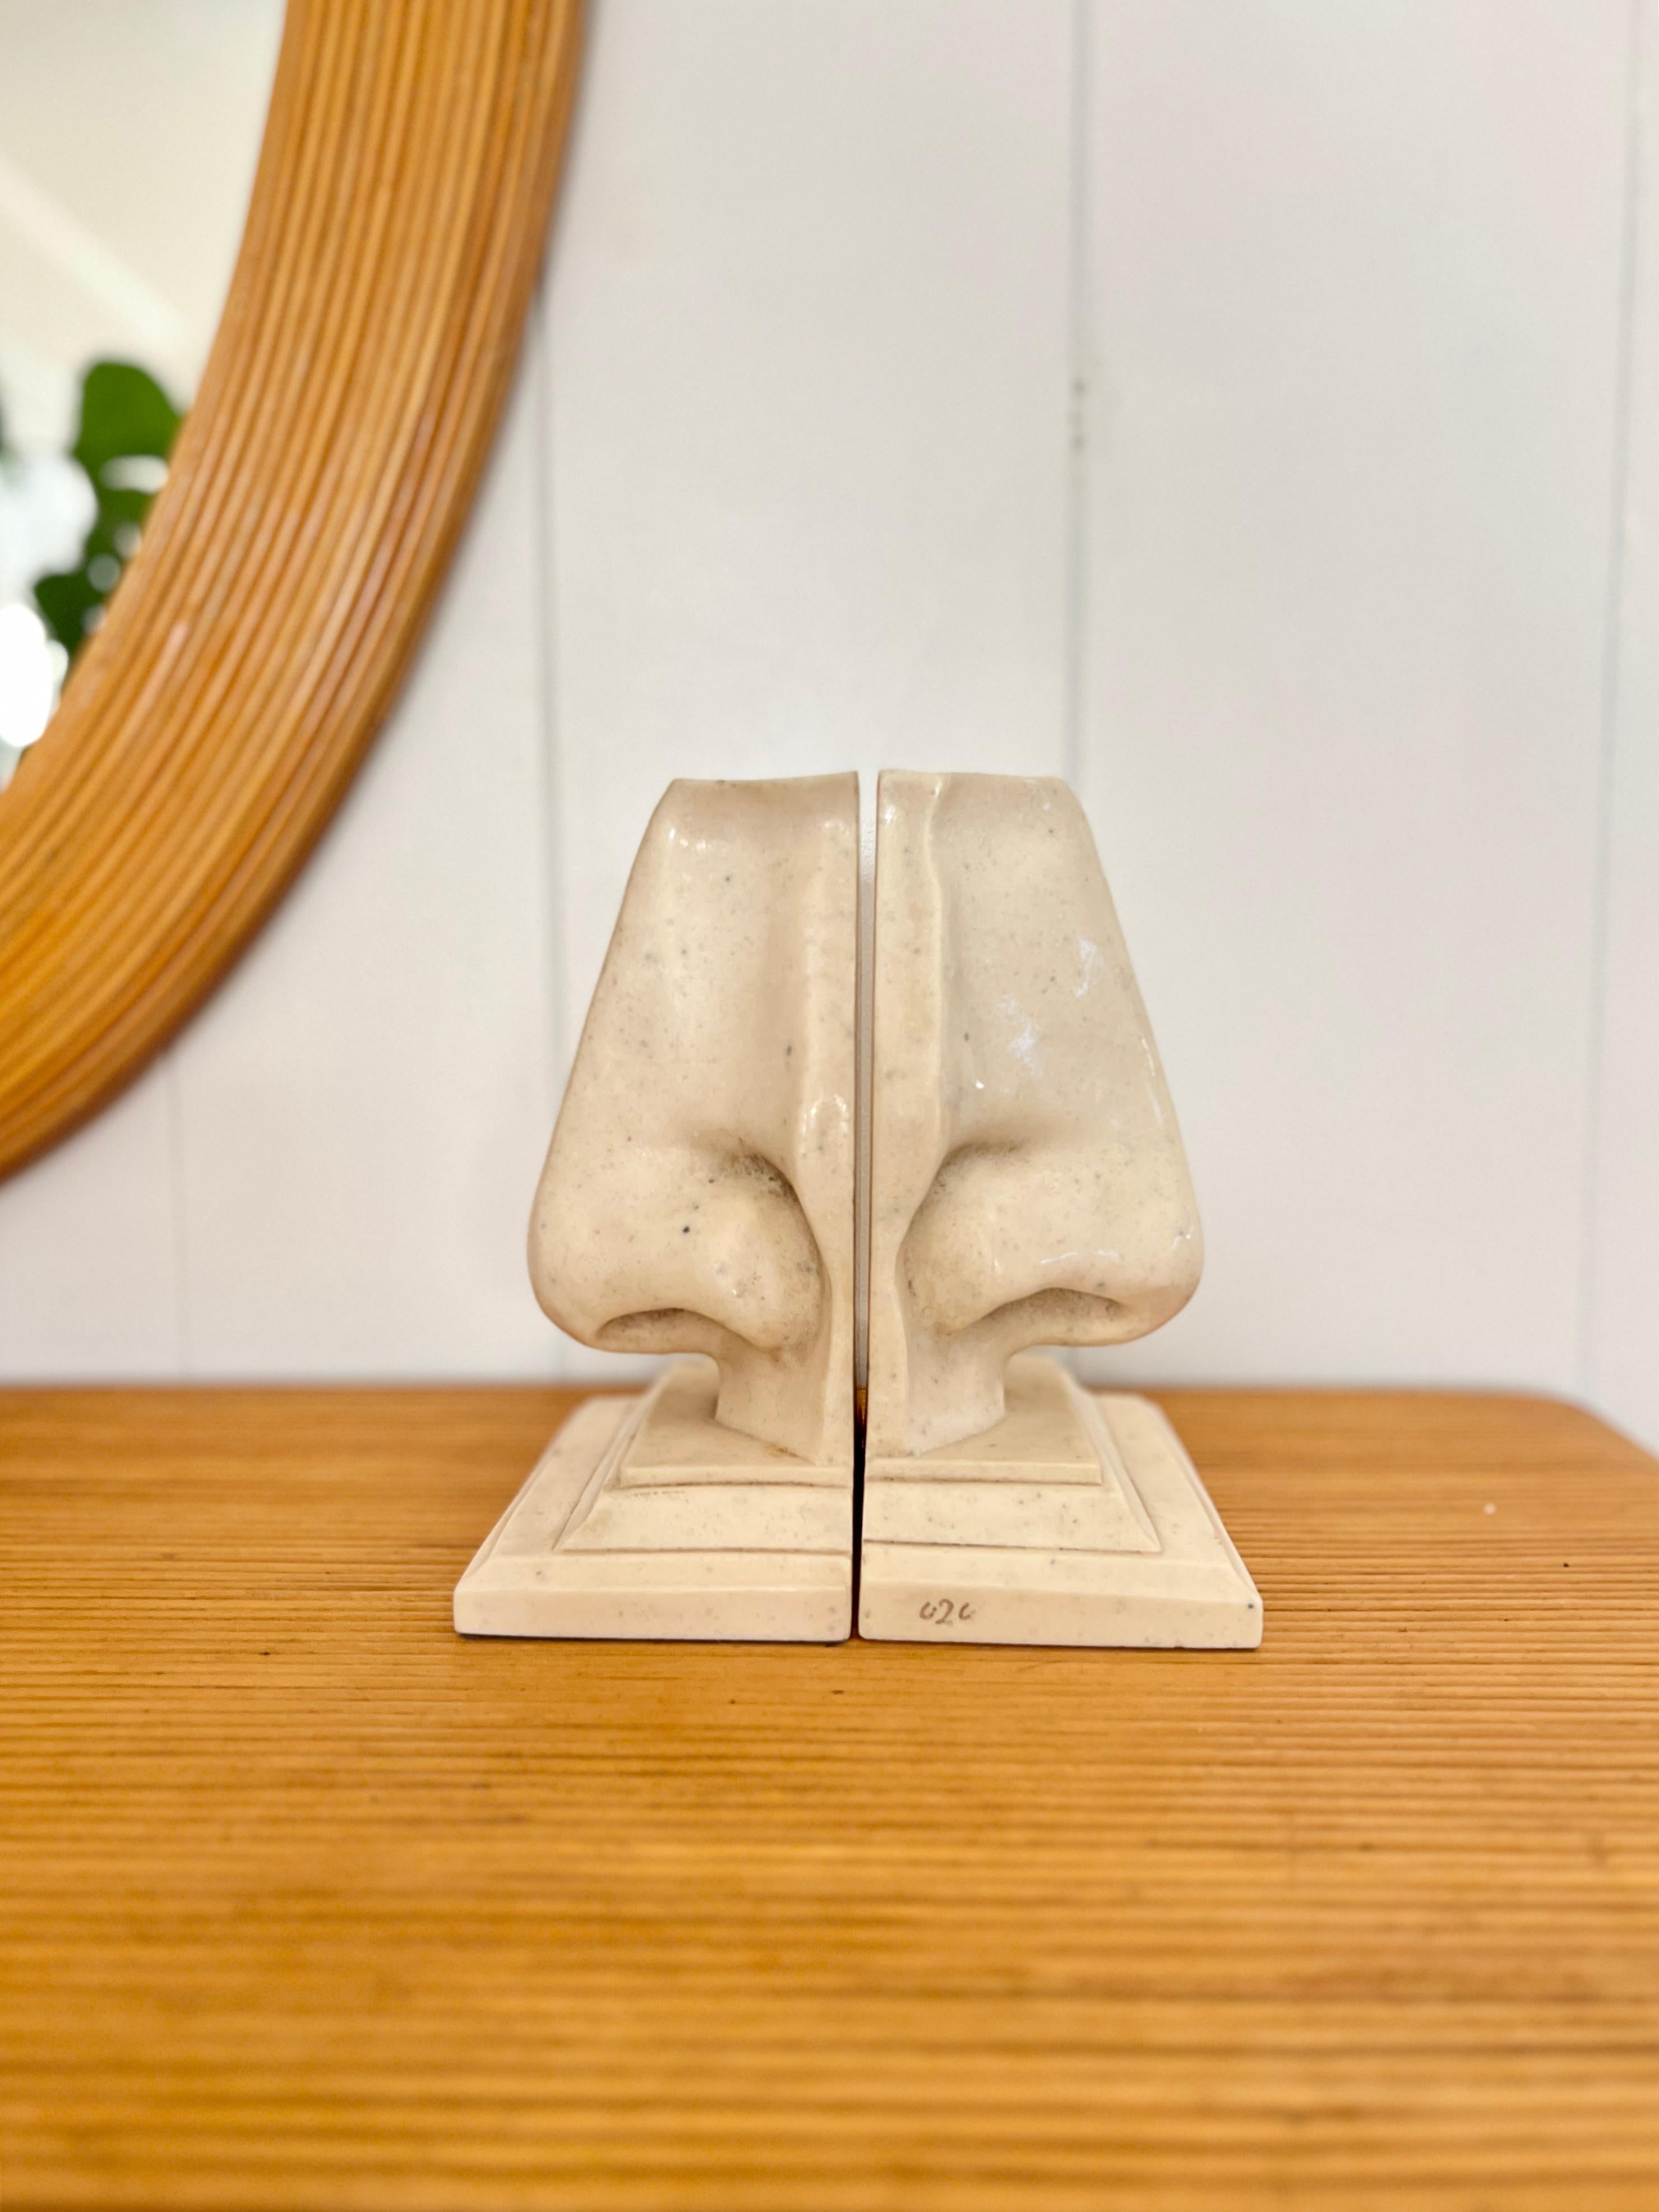 Vintage unusual nose bookends by C2C designs. Replicas of the Michelangelo’s nose and have the look of alabaster stone/composite marble. In good condition! 

Dimensions:
9” H x 6.5” W x 4” D.